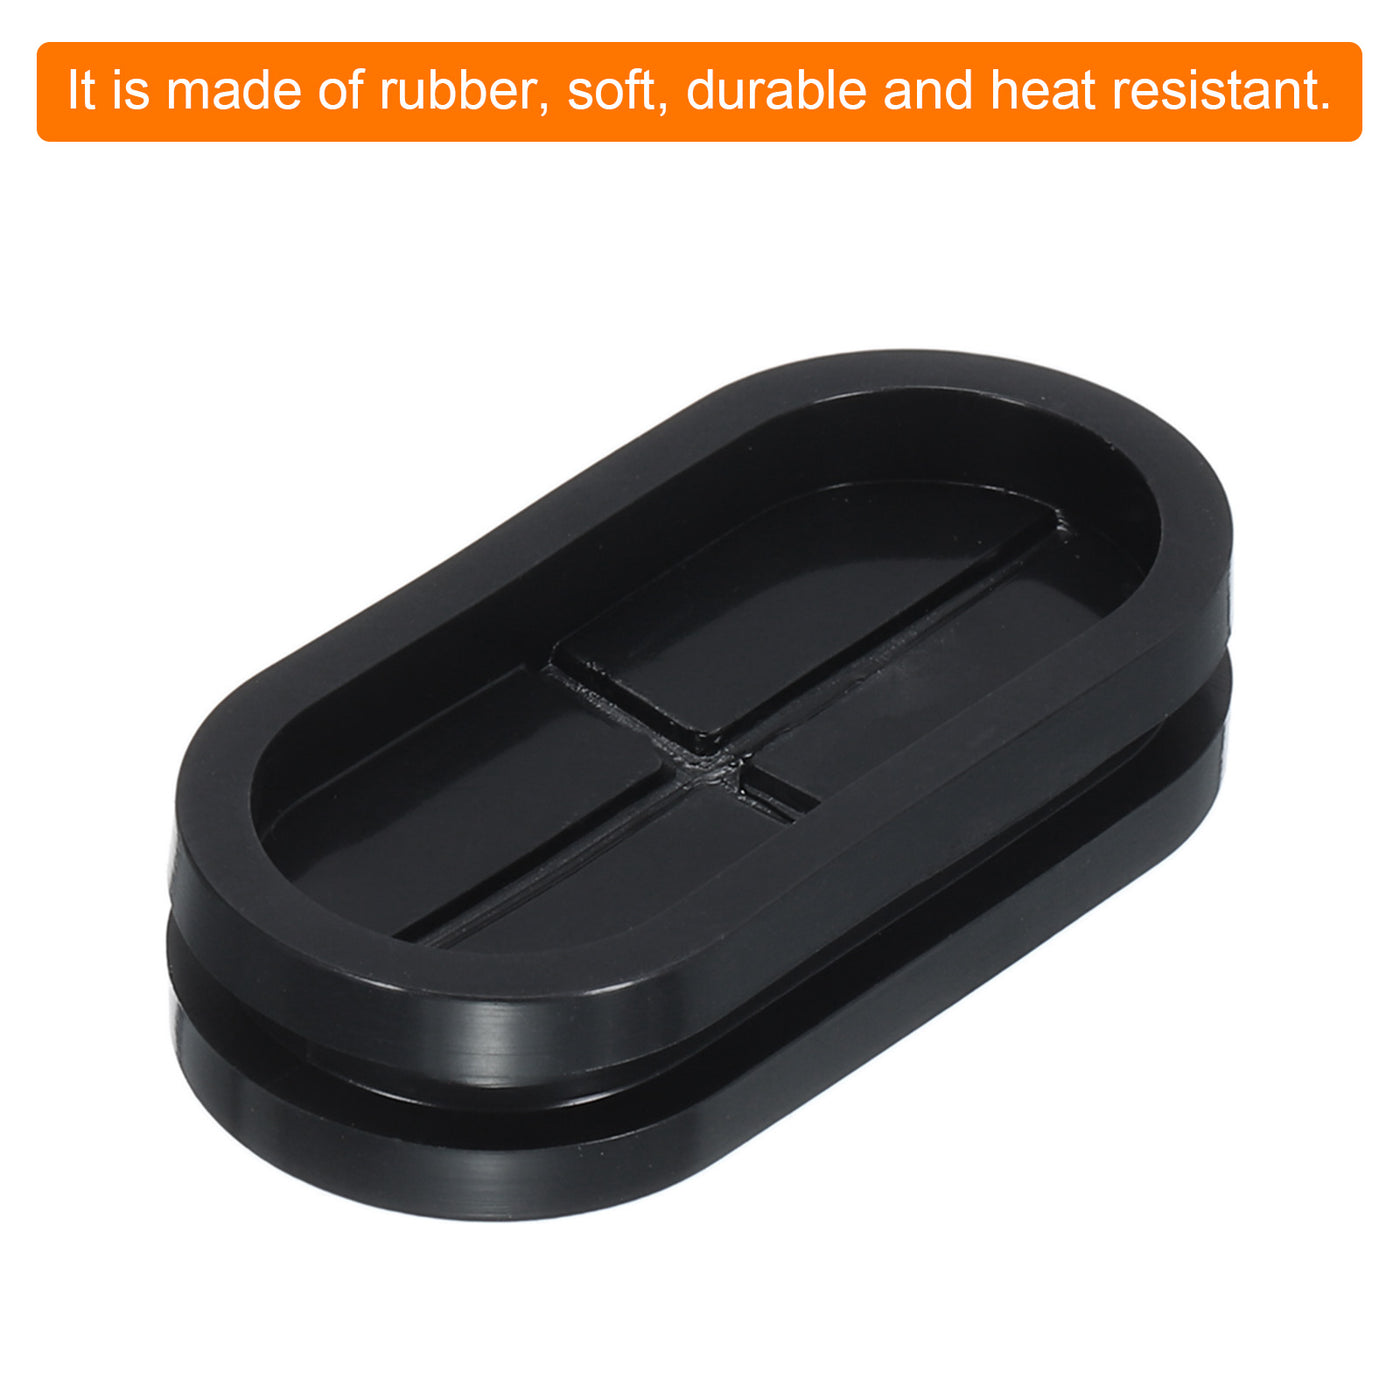 Harfington Rubber Grommet Mount Size 44 x 20 mm Oval Double-Sided for Wire Seal Protection 4pcs